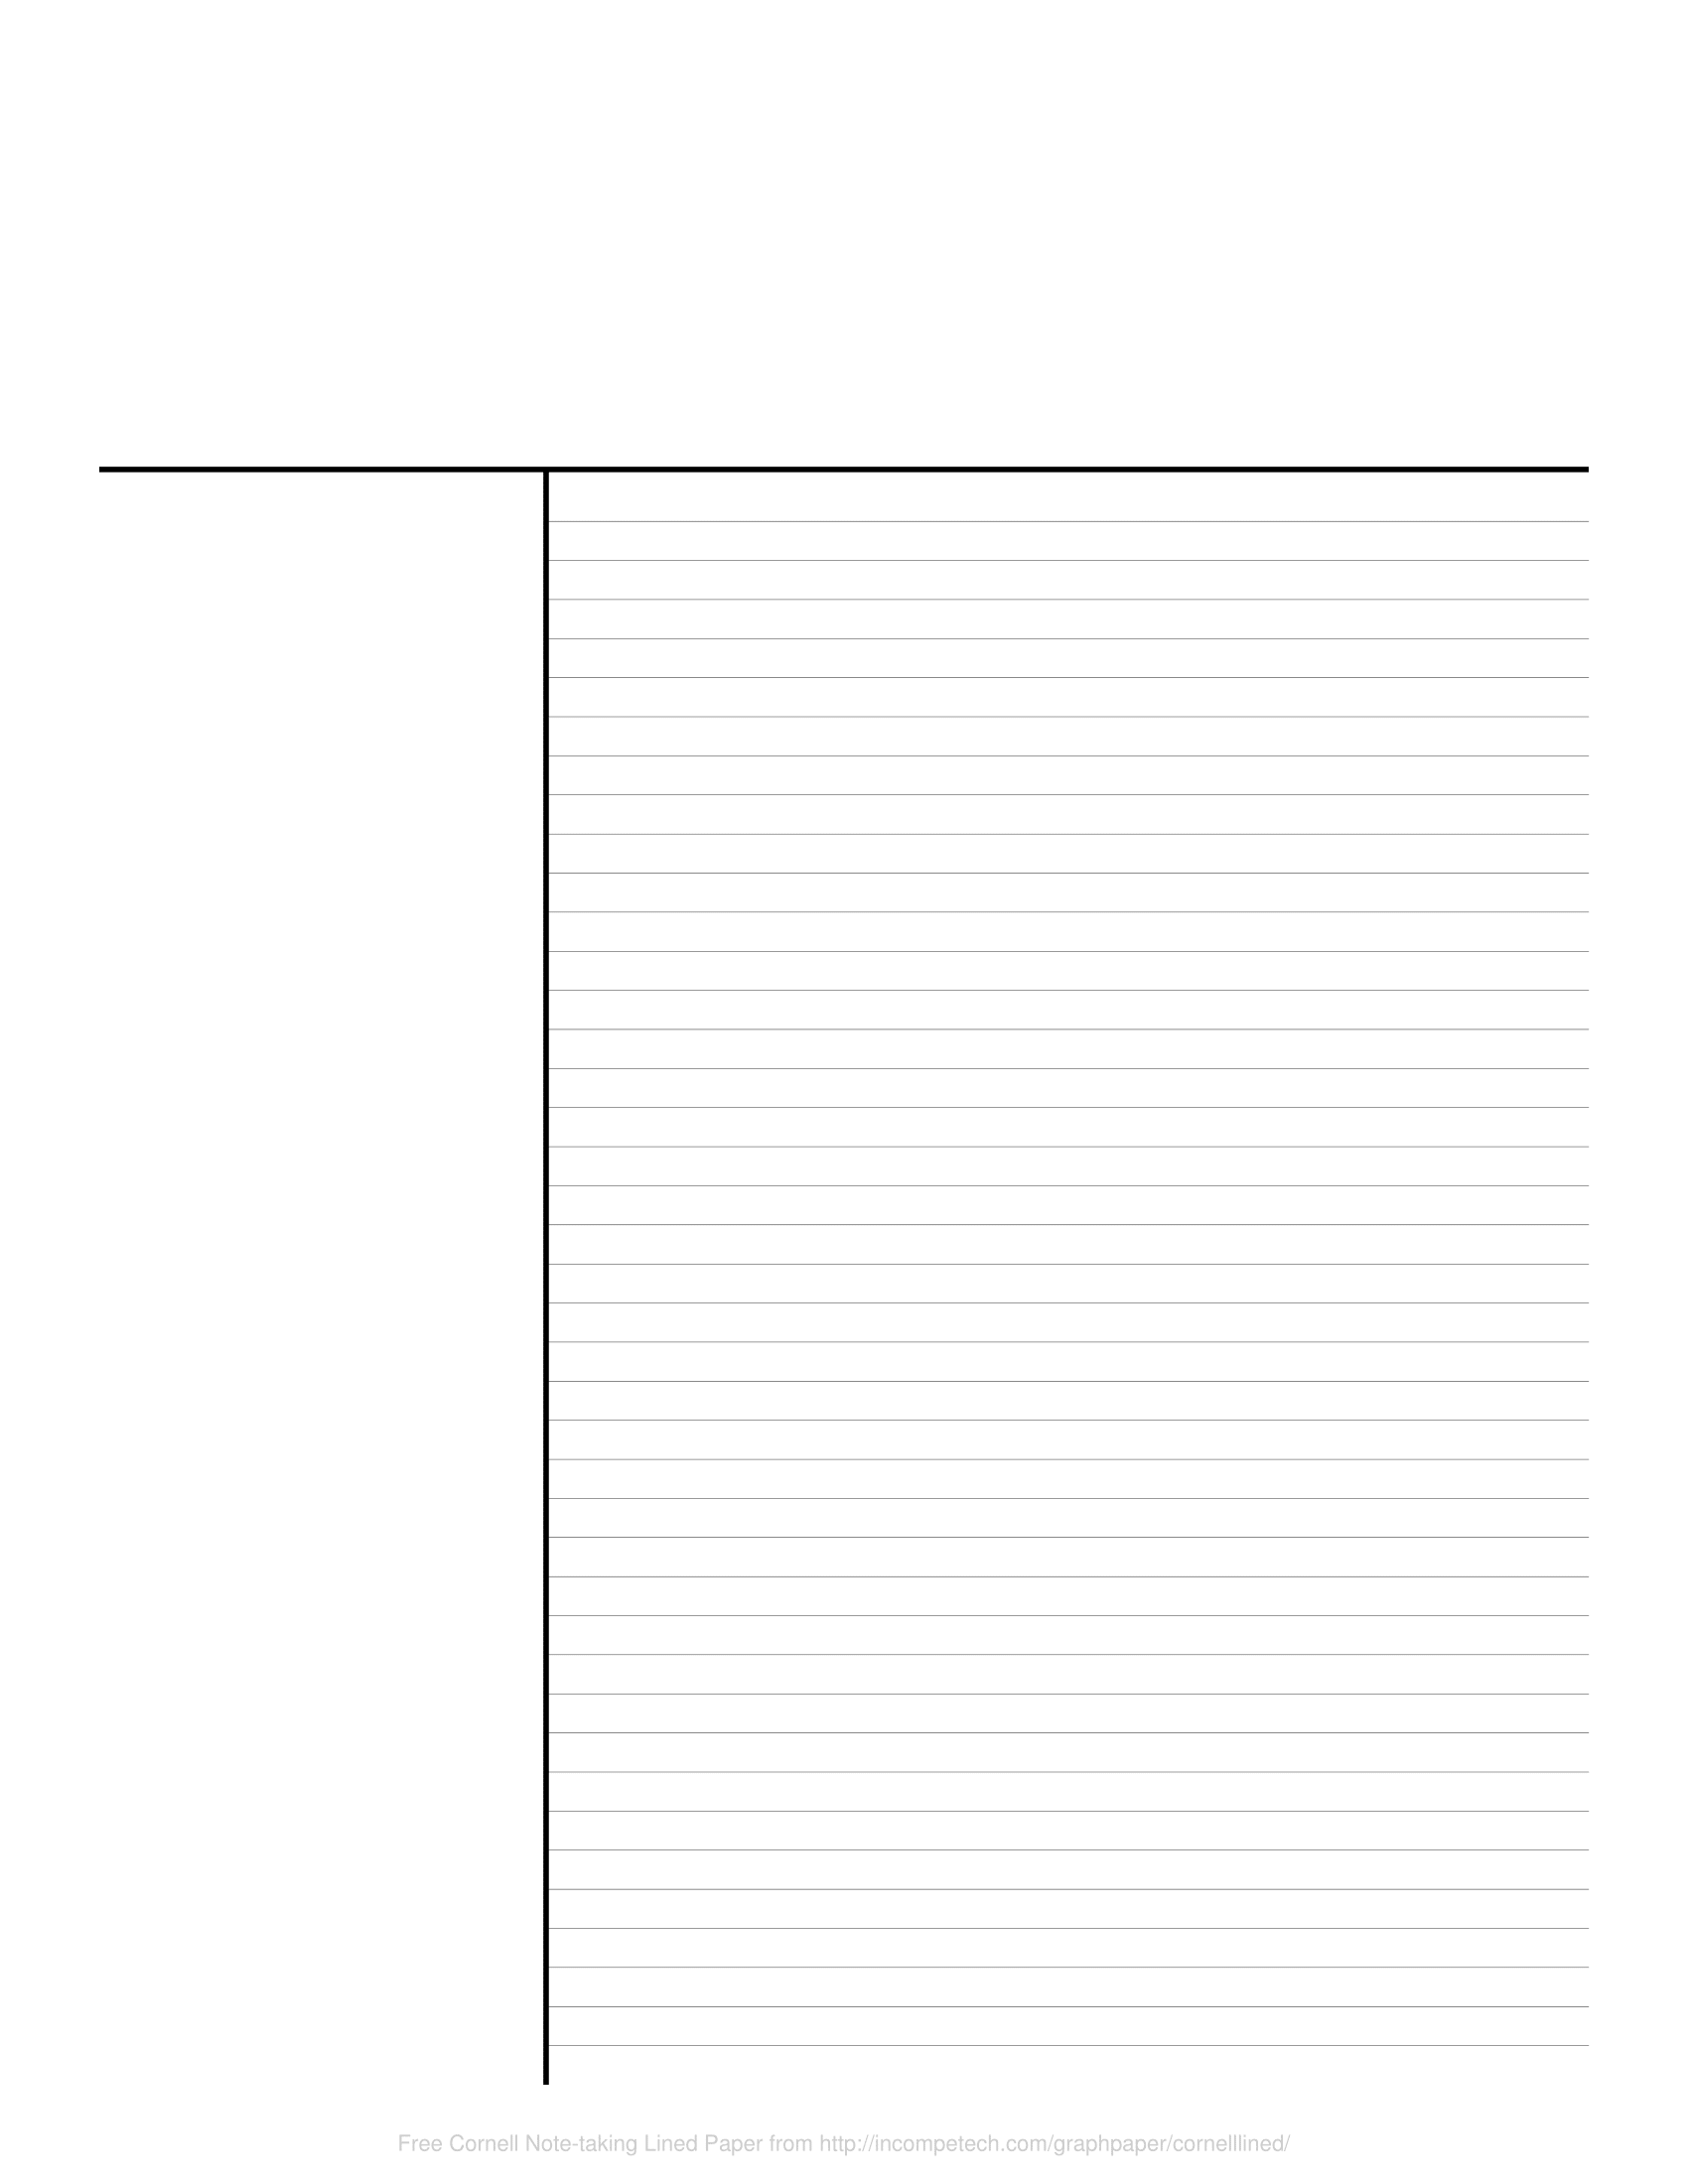 free online graph paper cornell note taking lined